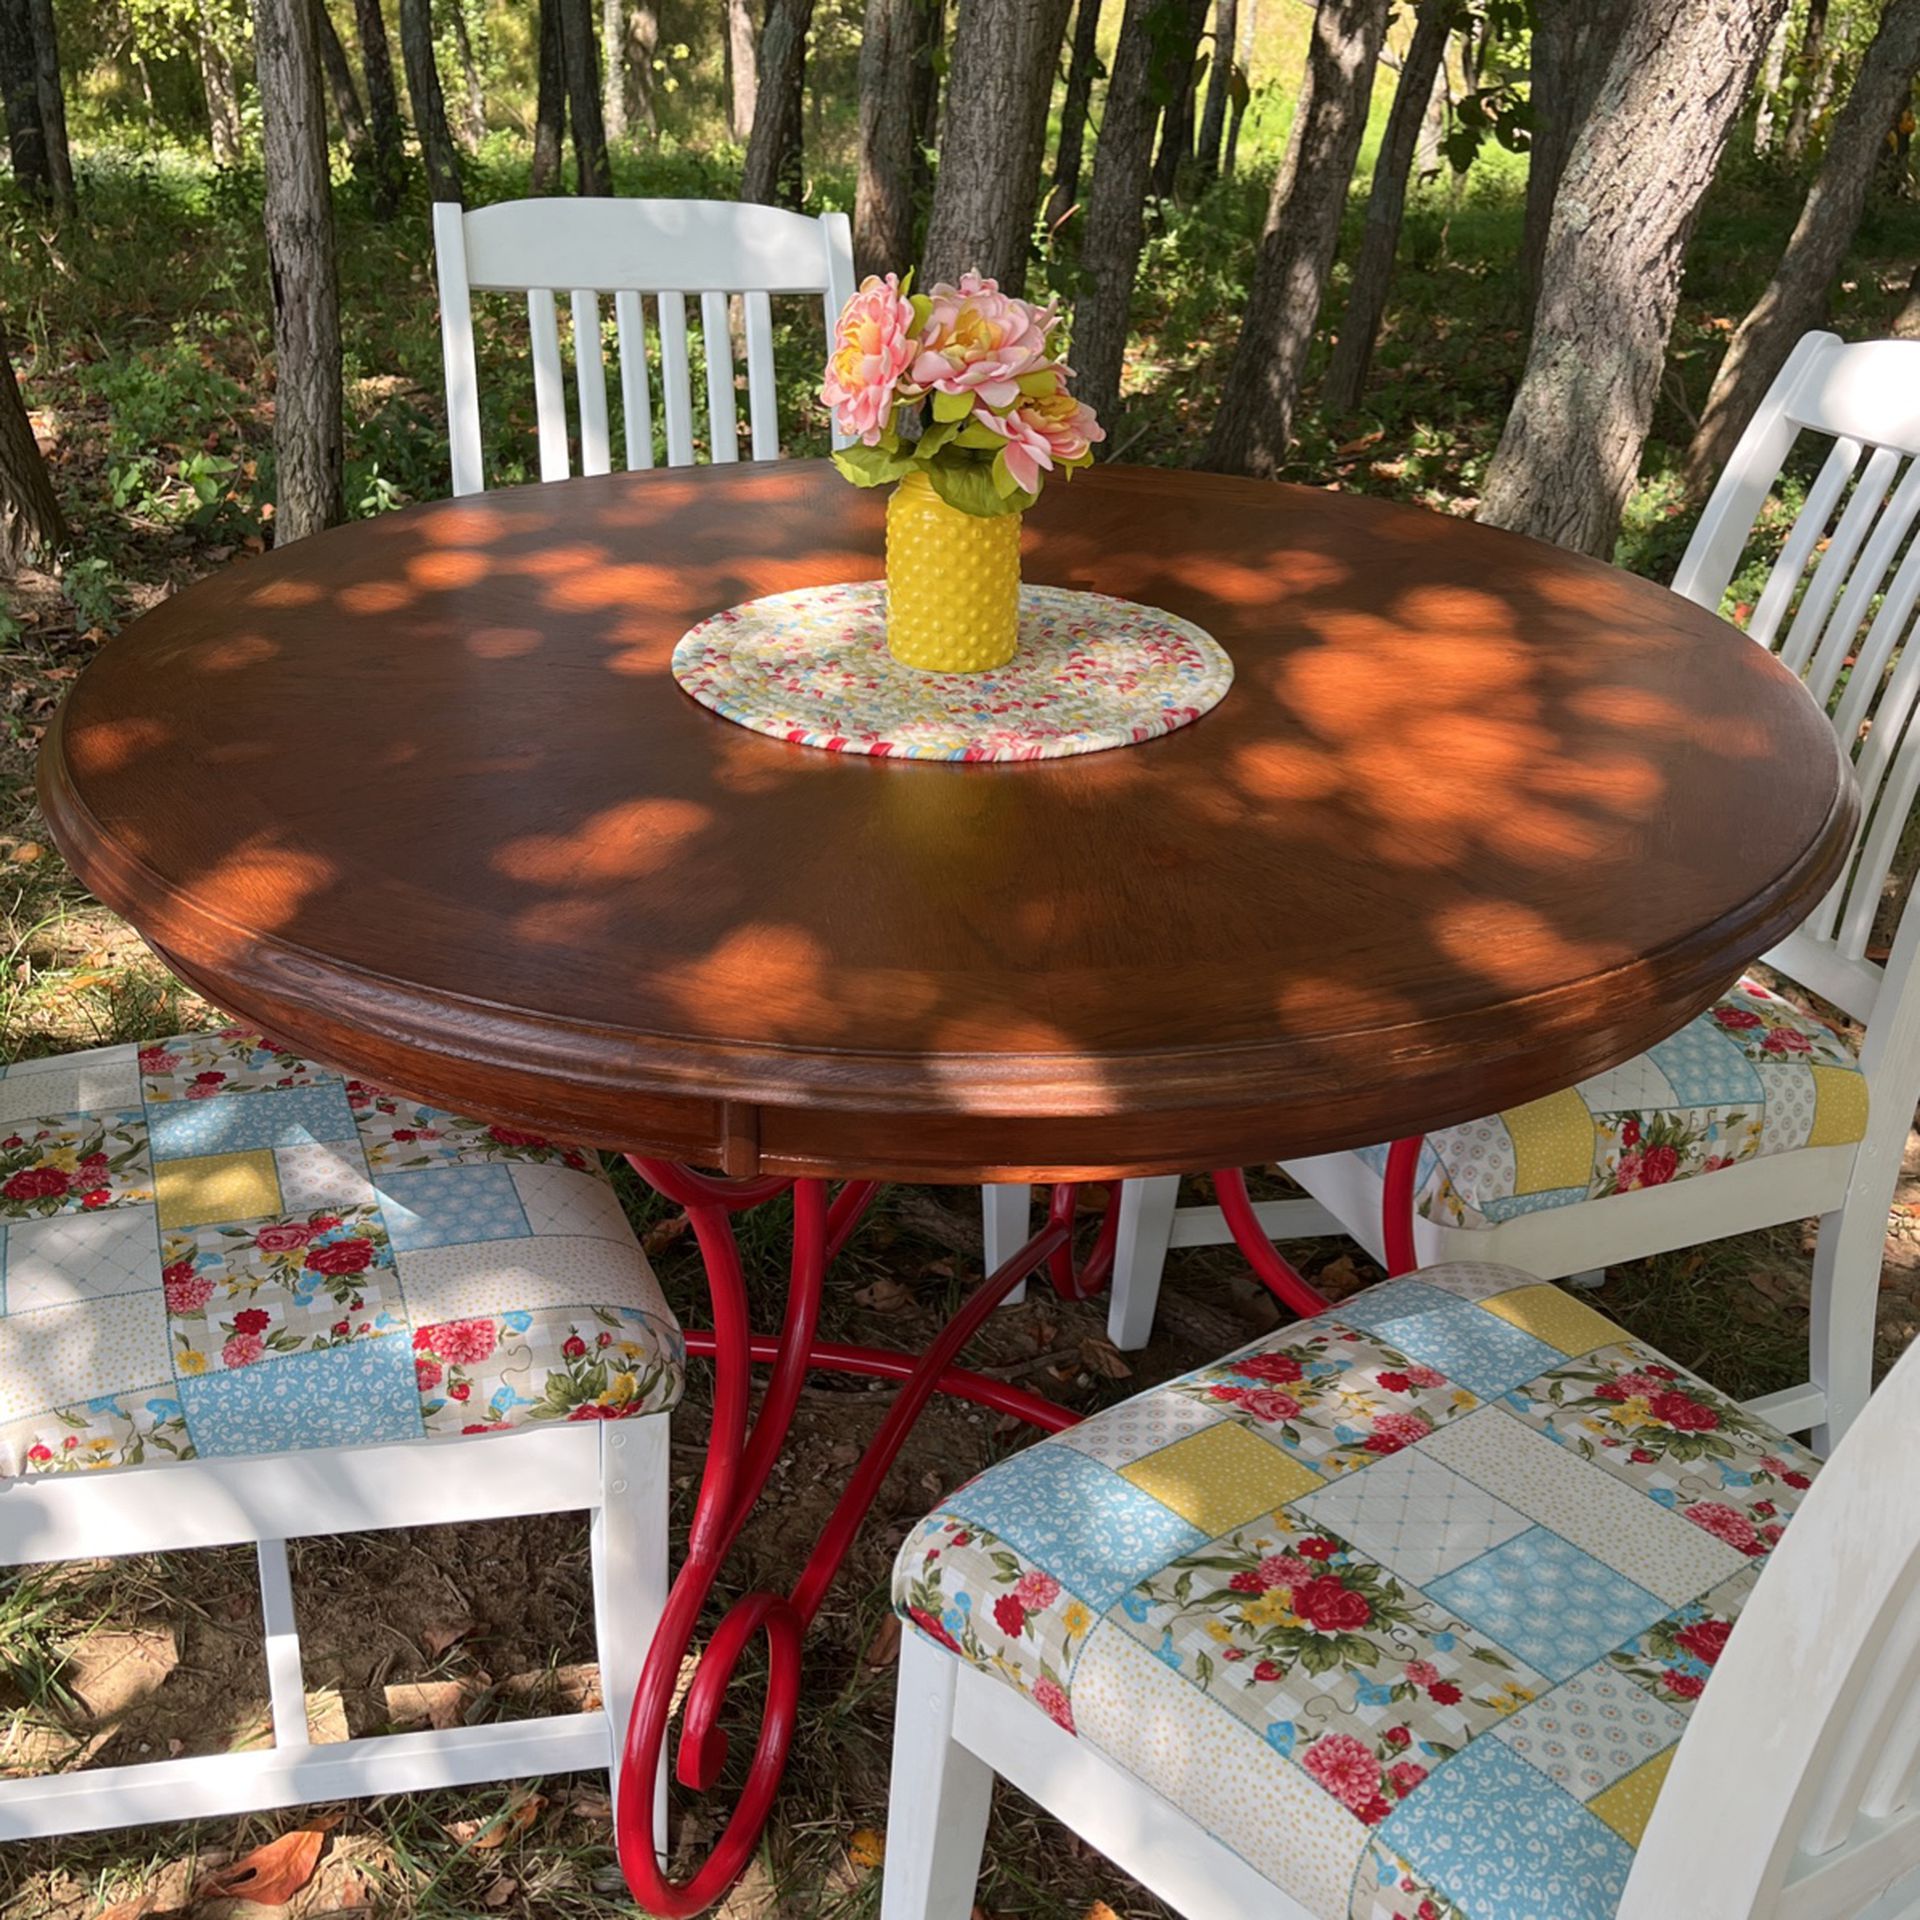 Dinette Set /table and chairs 